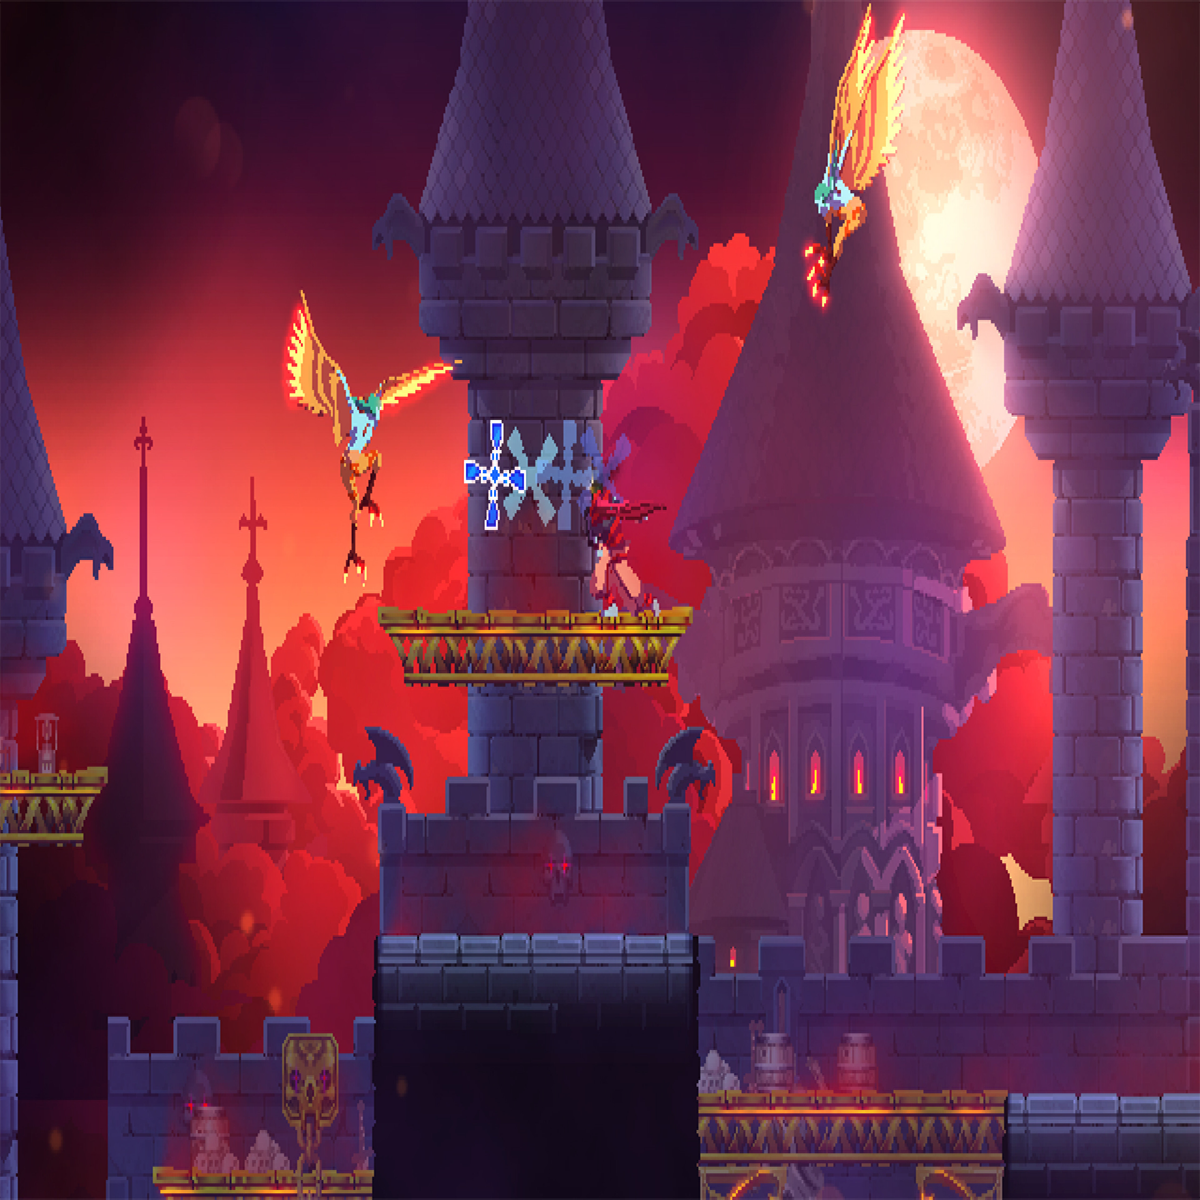 Dead Cells: Return to Castlevania Edition Nintendo Switch Gameplay 